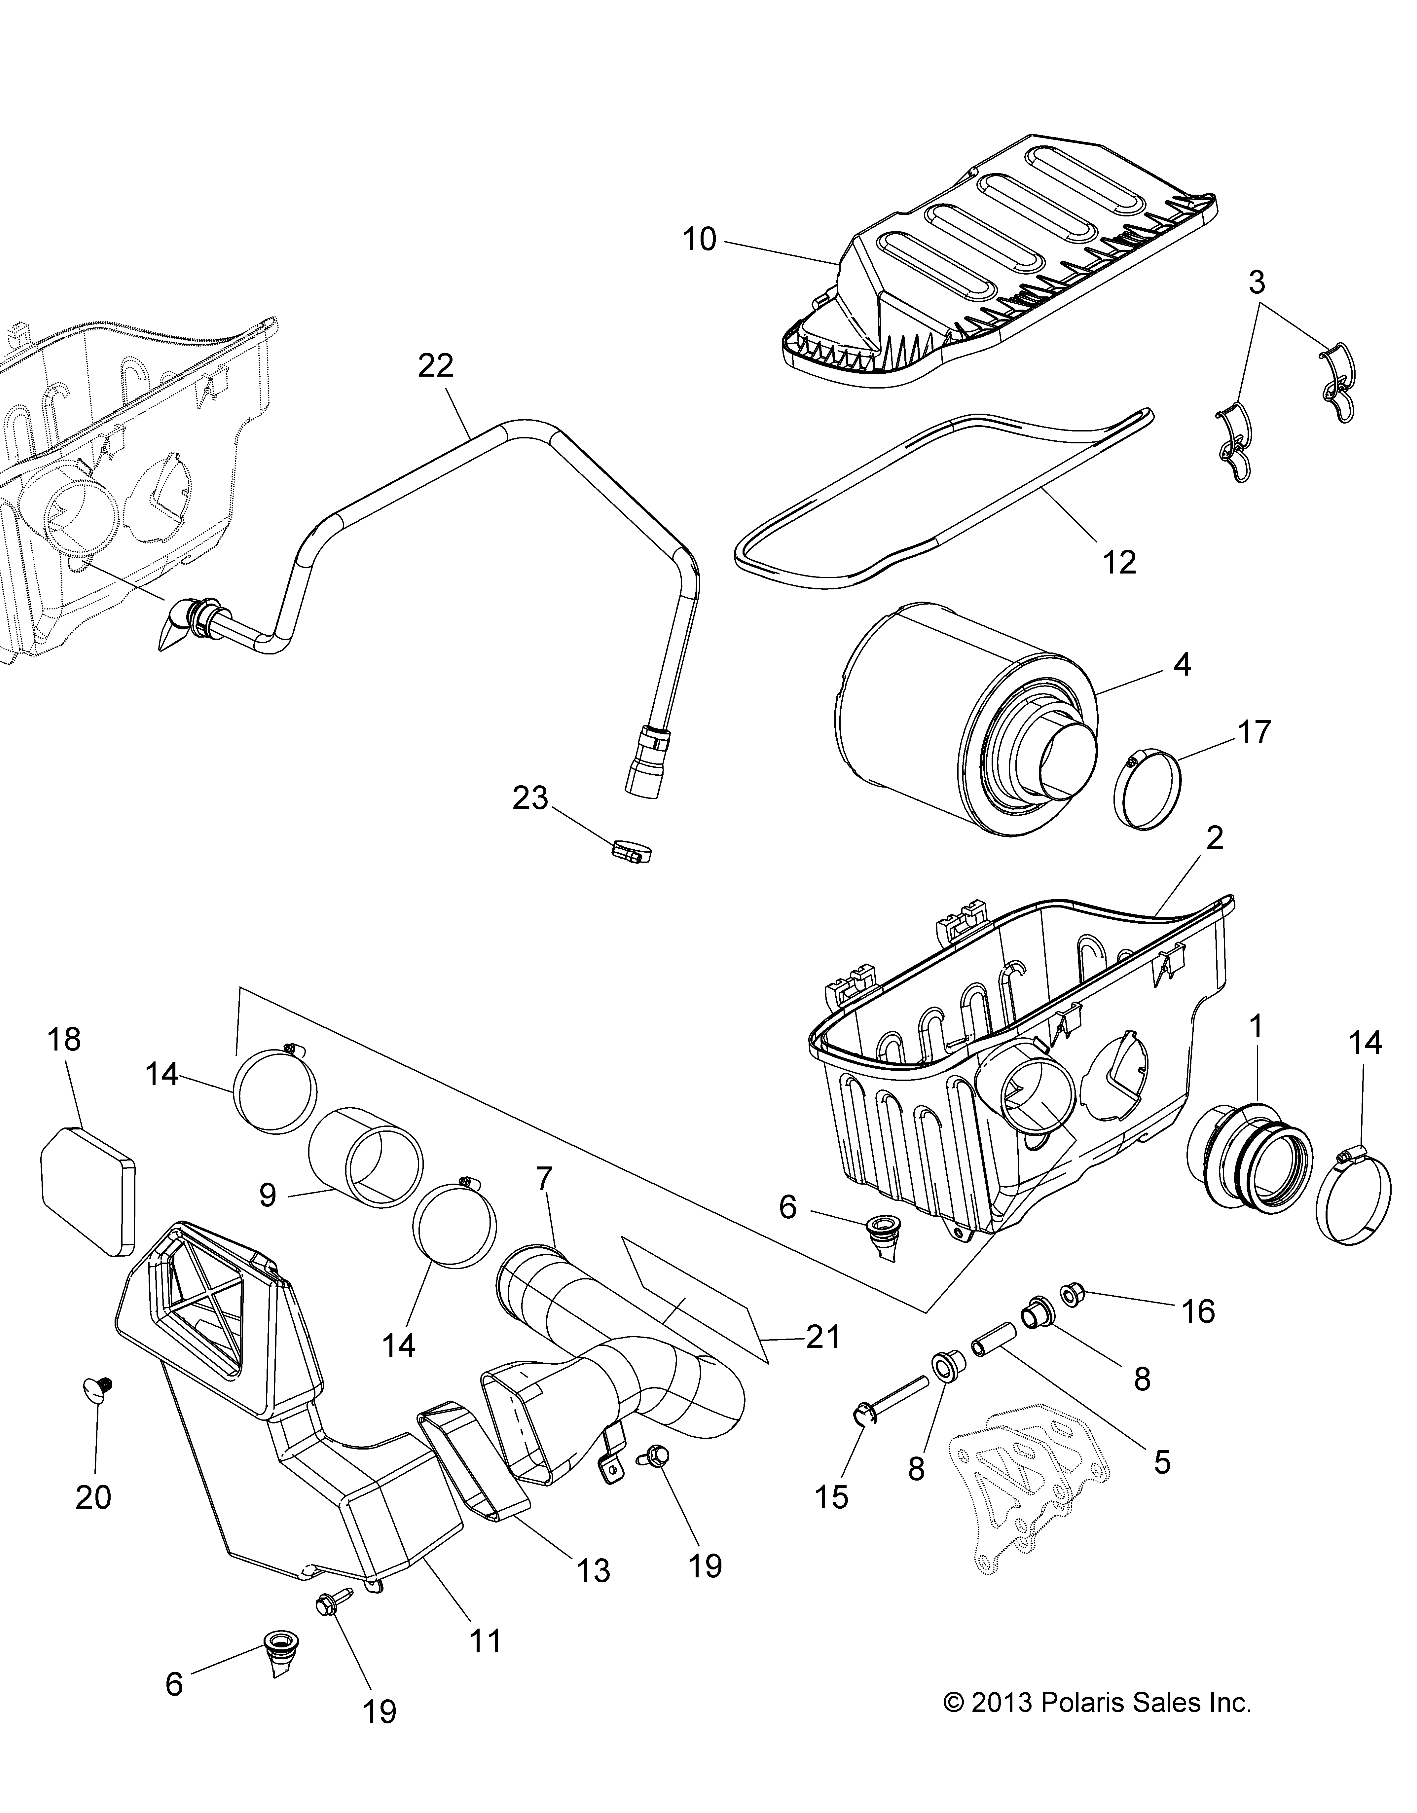 Part Number : 5450494 BOOT-ENGINE INTAKE